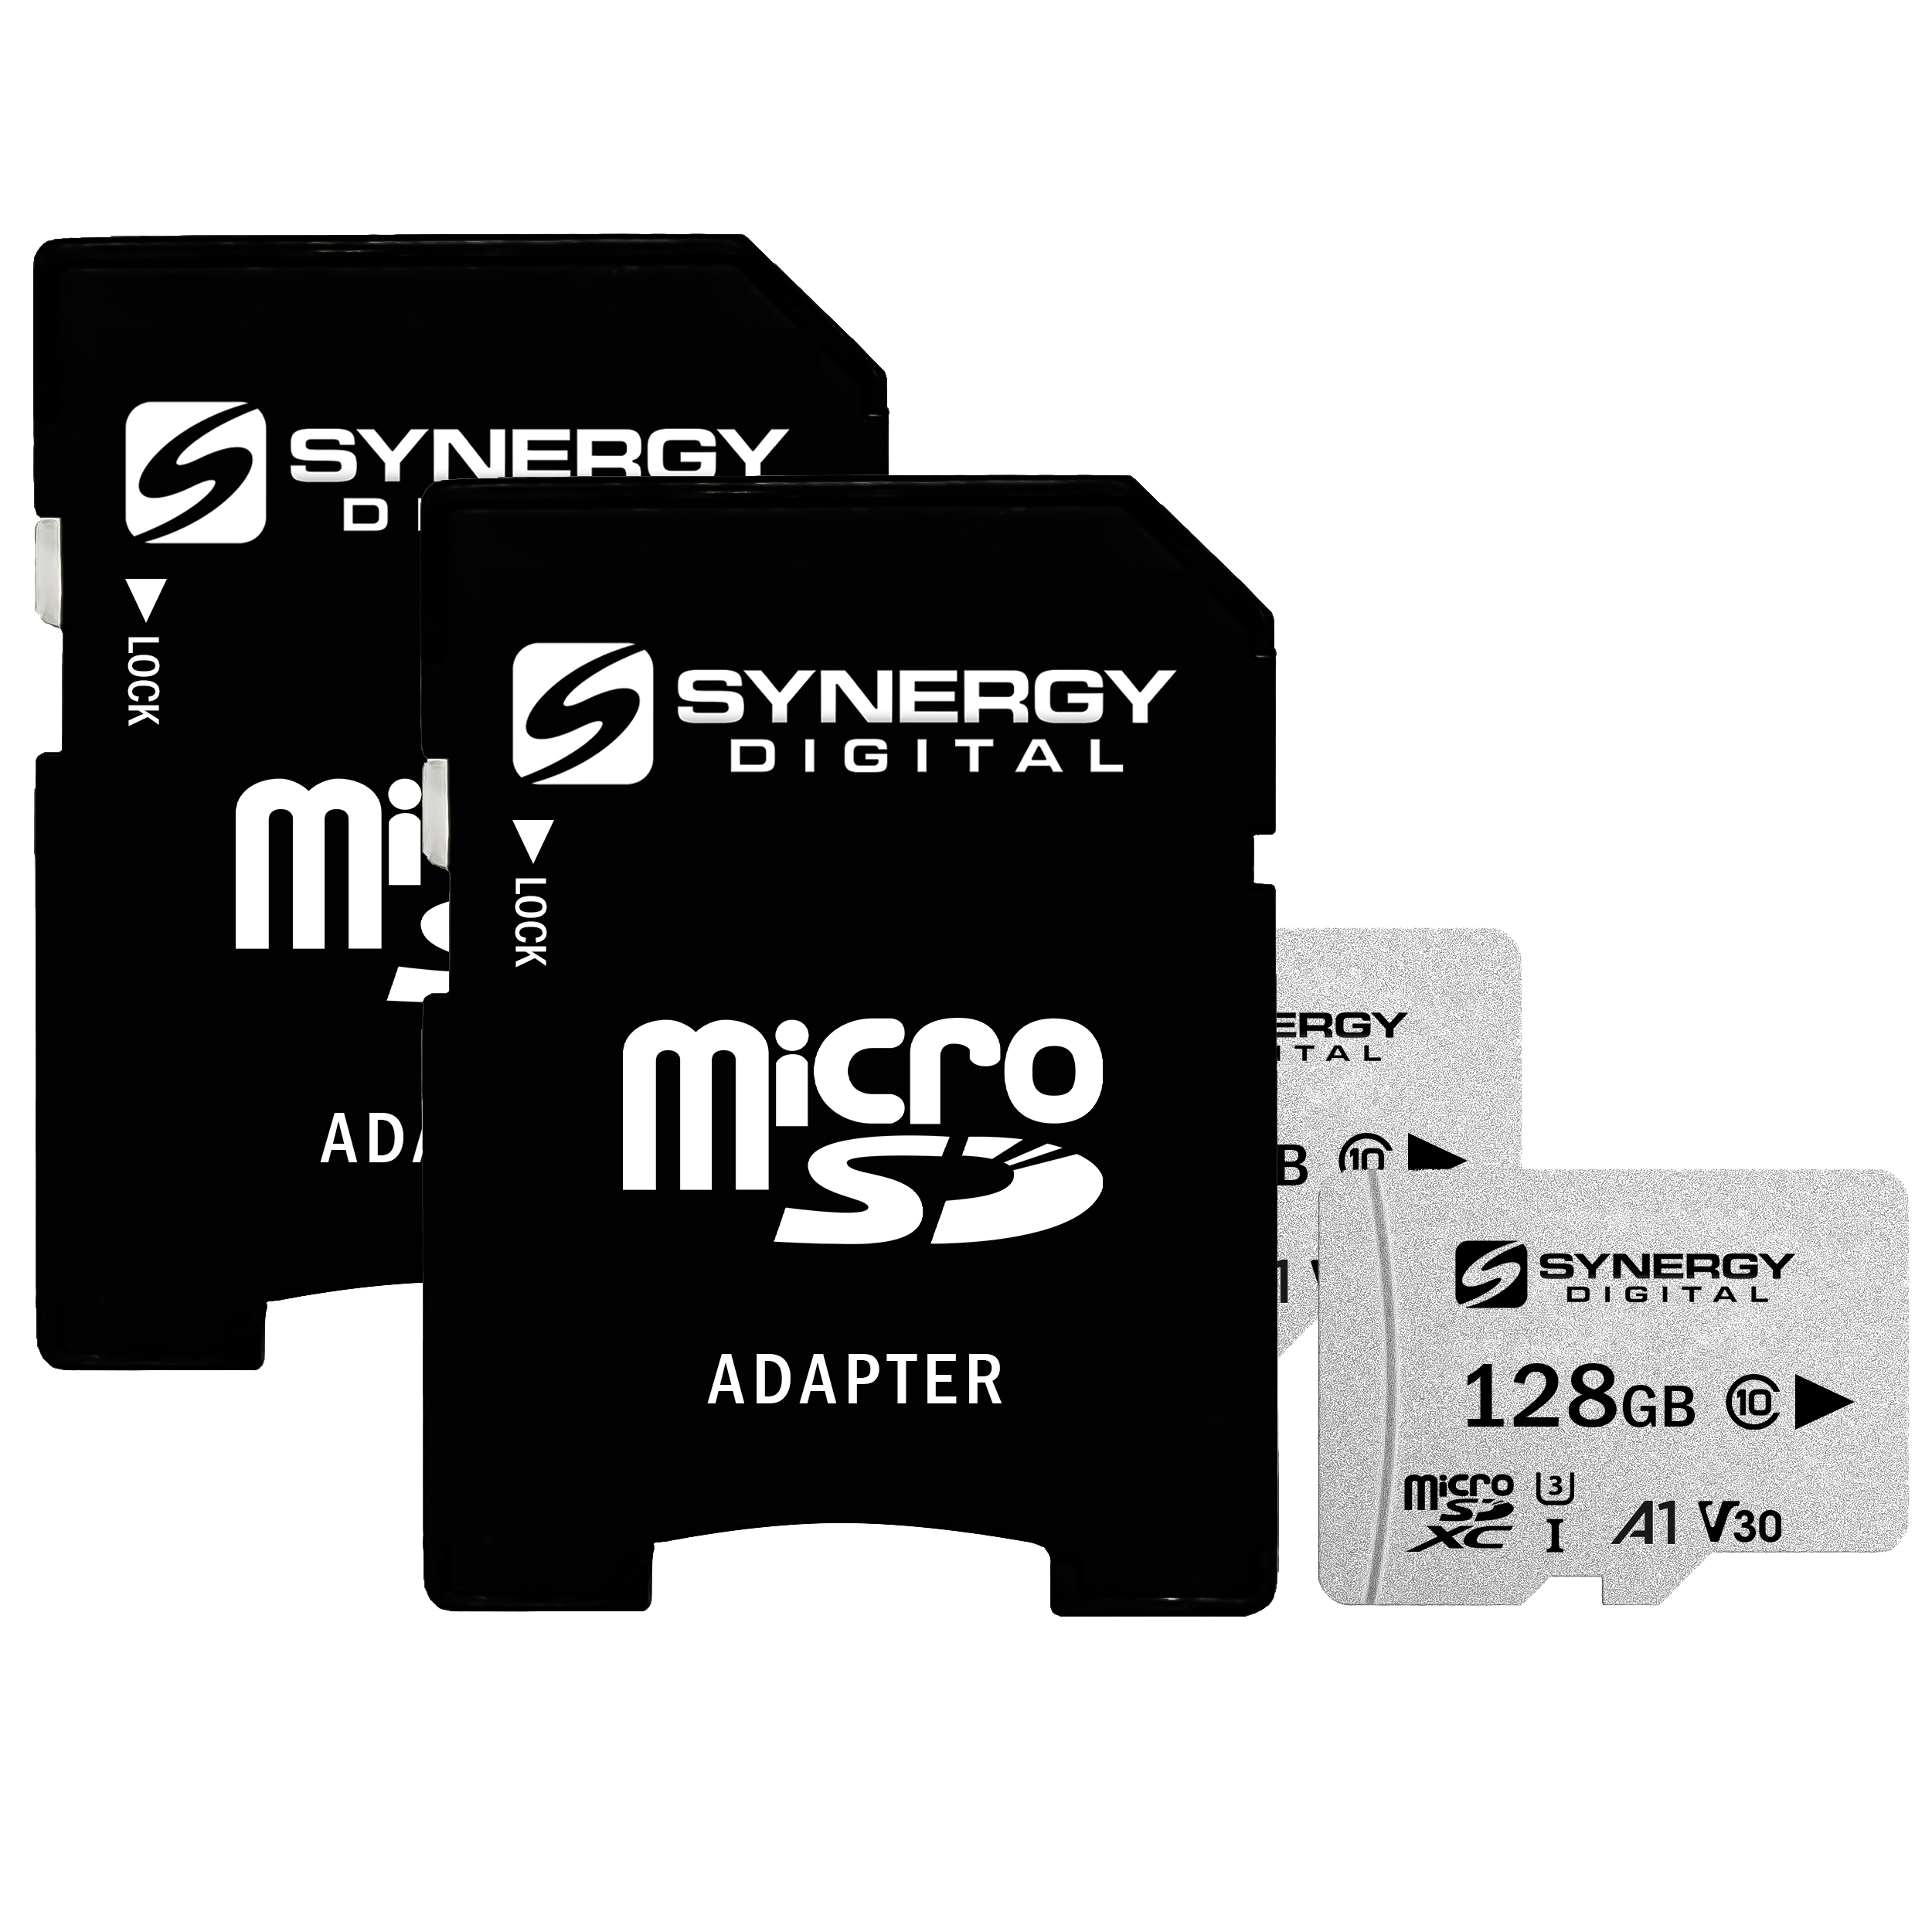 2 x 128GB microSDHC Memory Card with SD Adapter